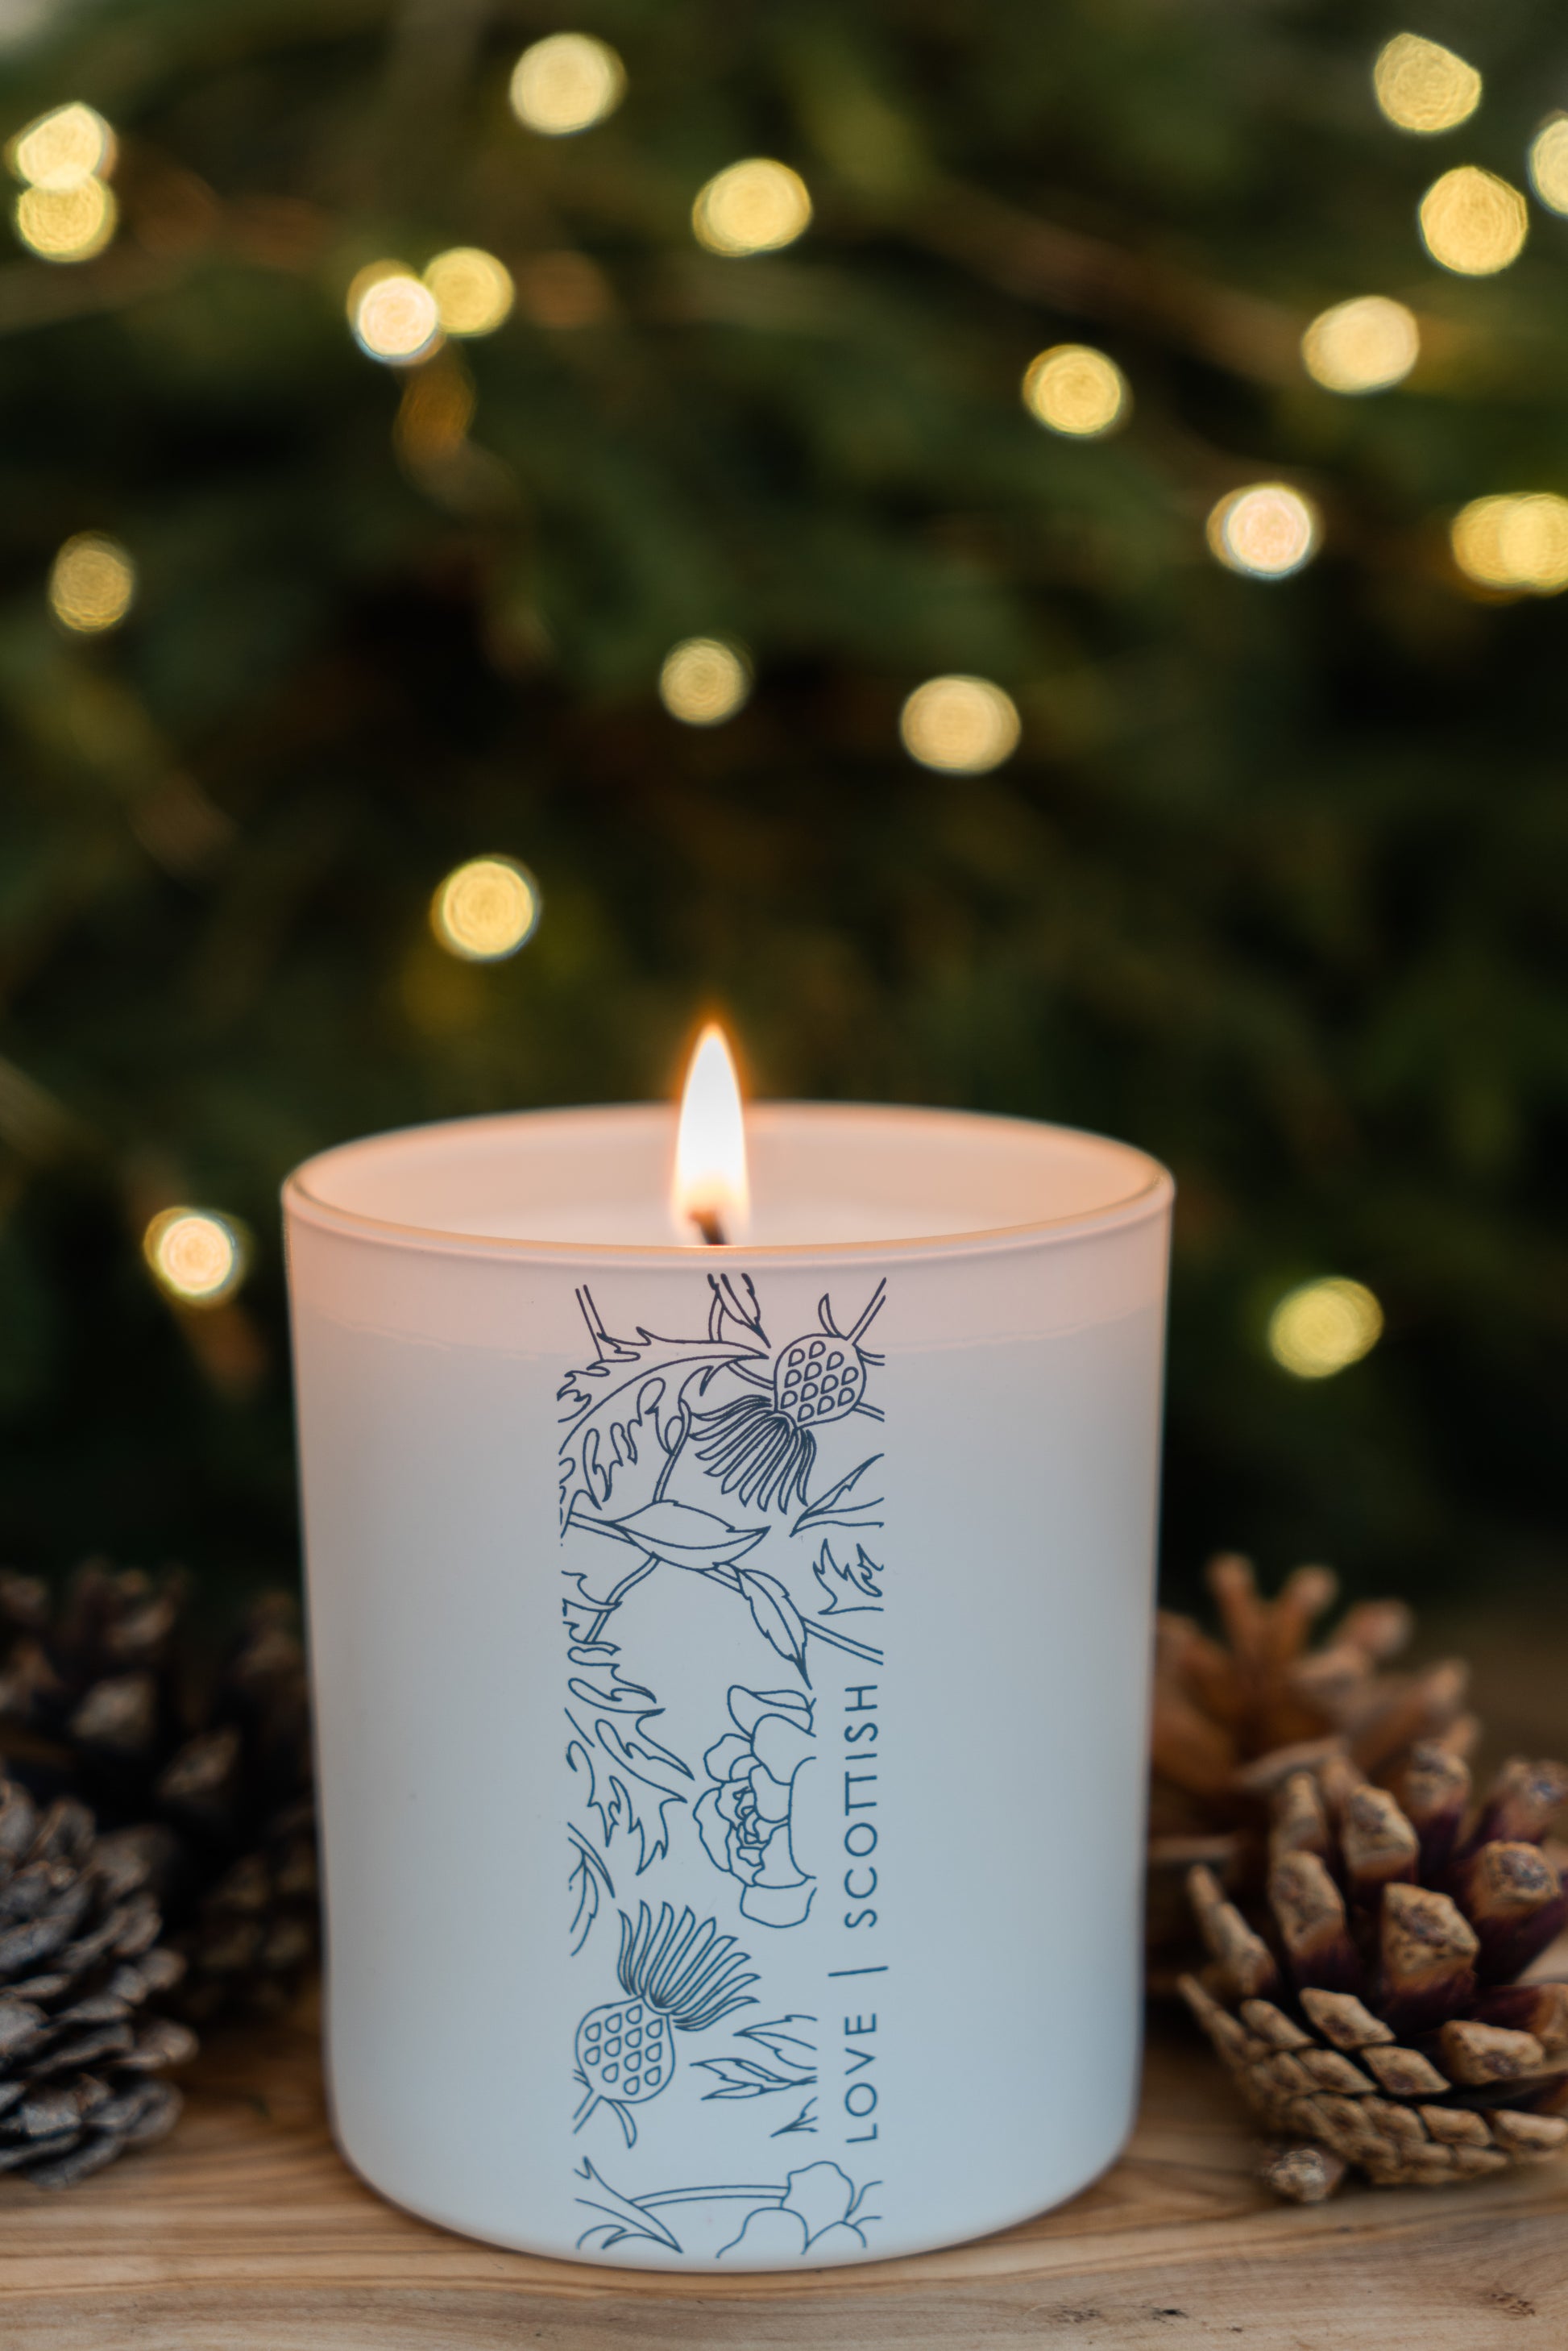 Love Scottish Merry Christmas Wax Candle. Made in Scotland.